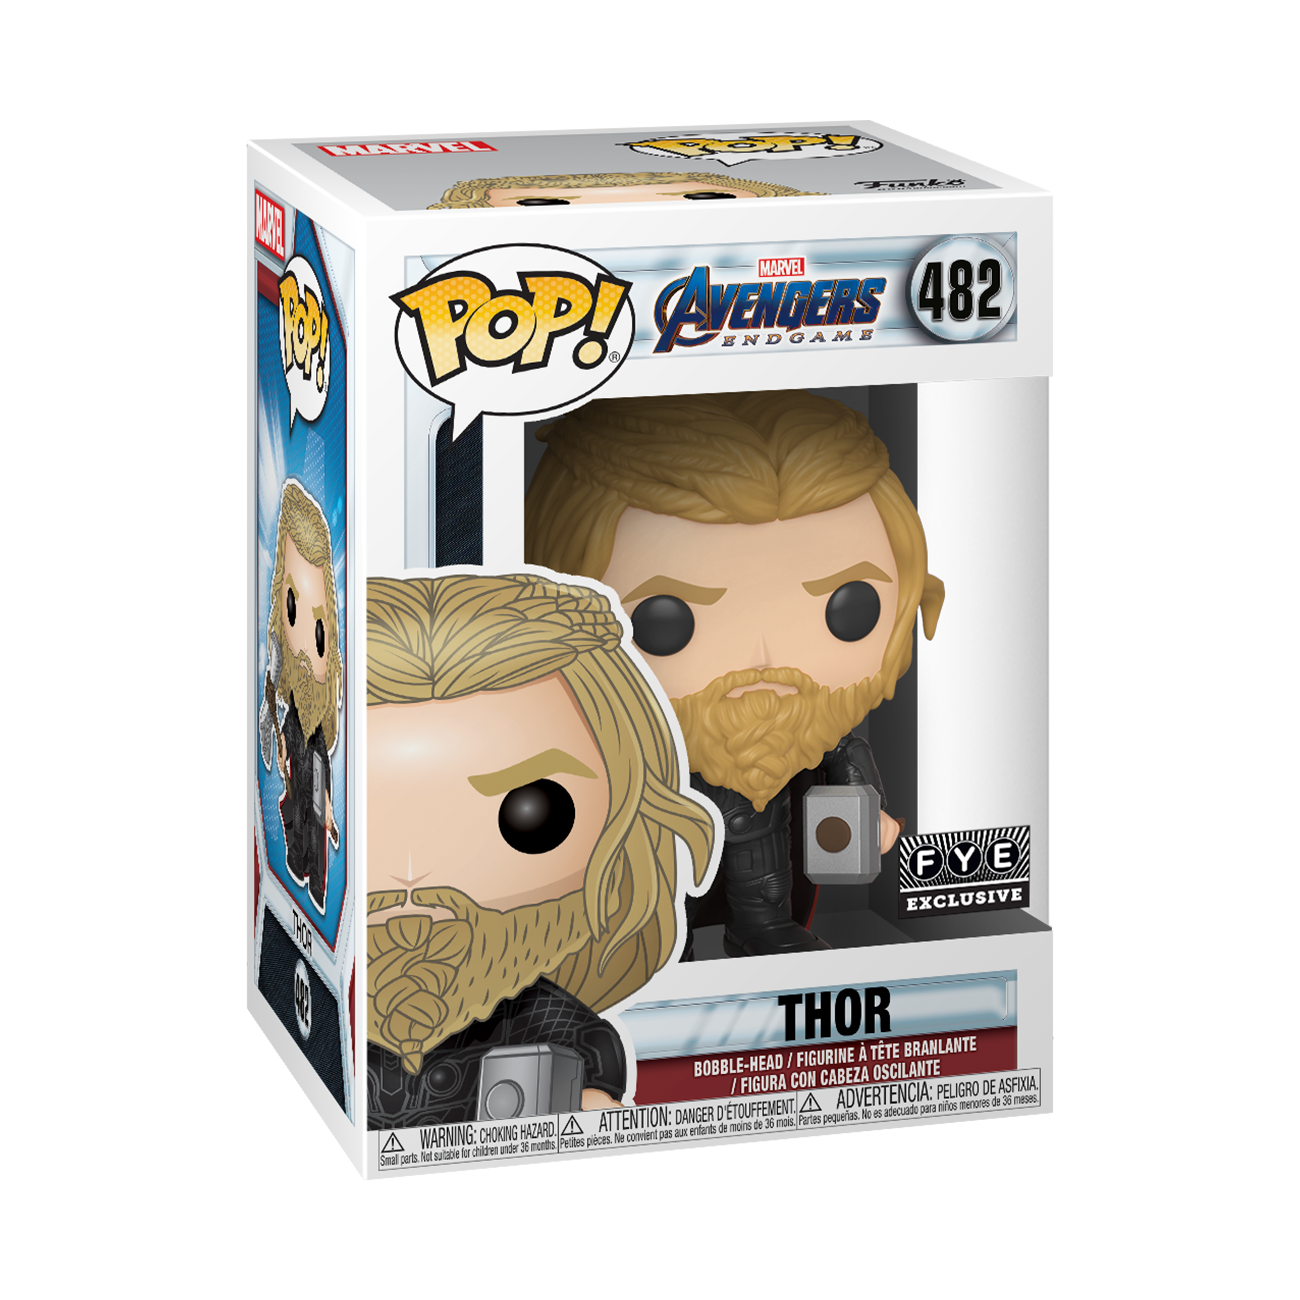 In-box look at the FYE exclusive Pop! Thor.